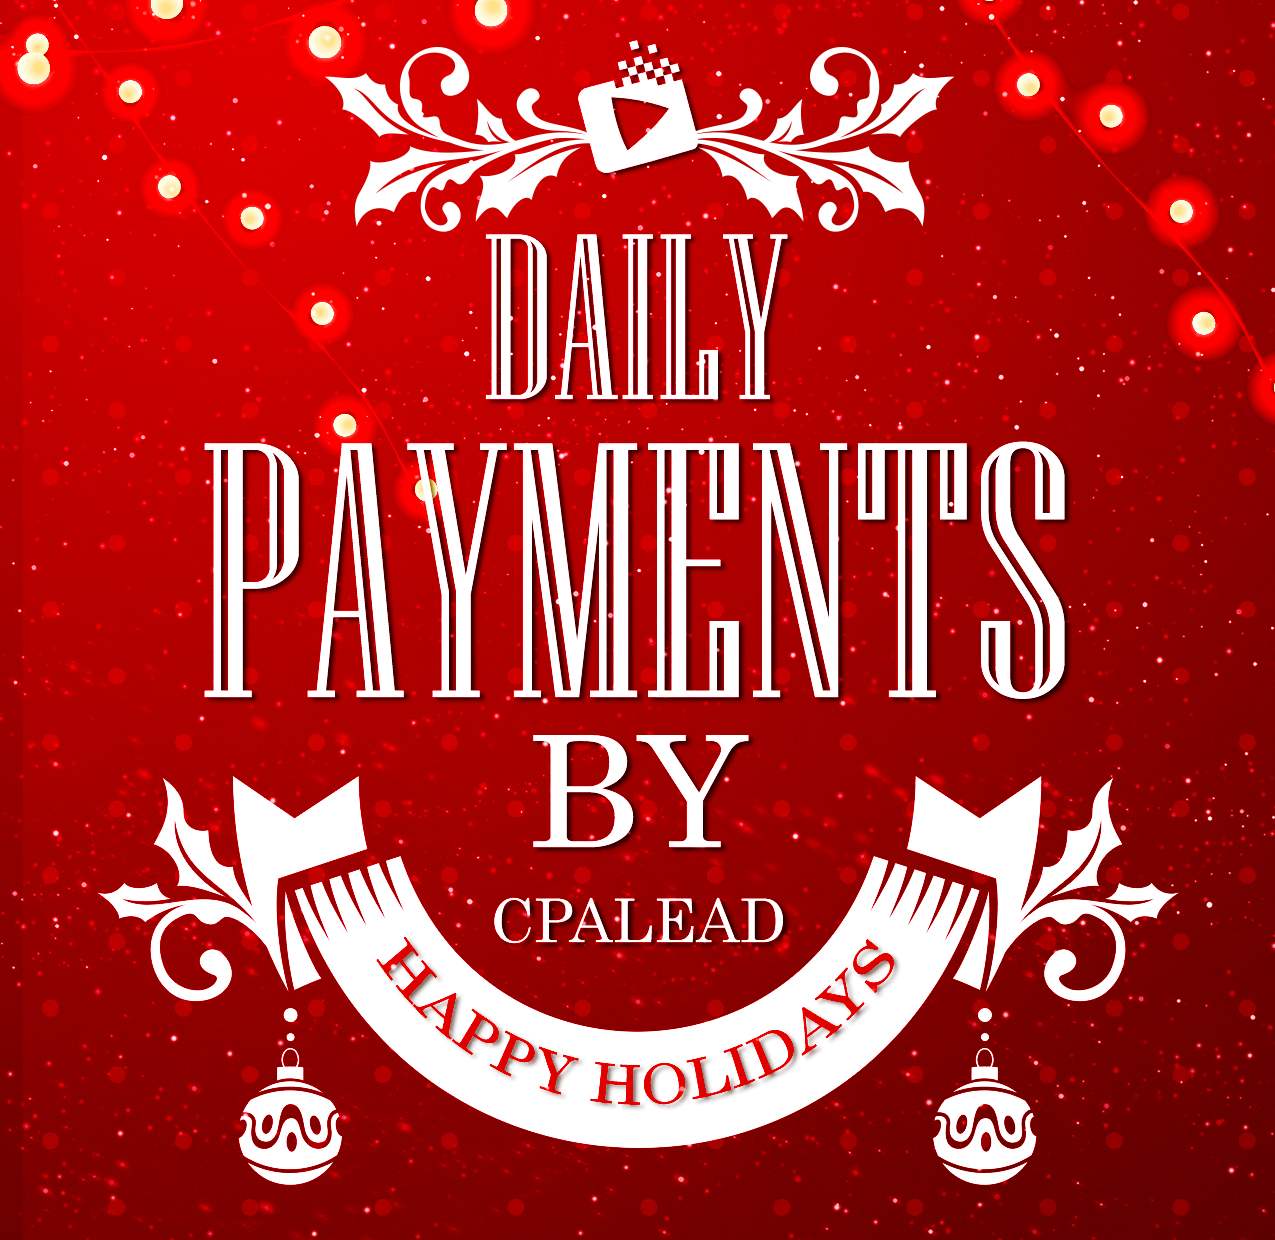 CPAlead Daily Payments